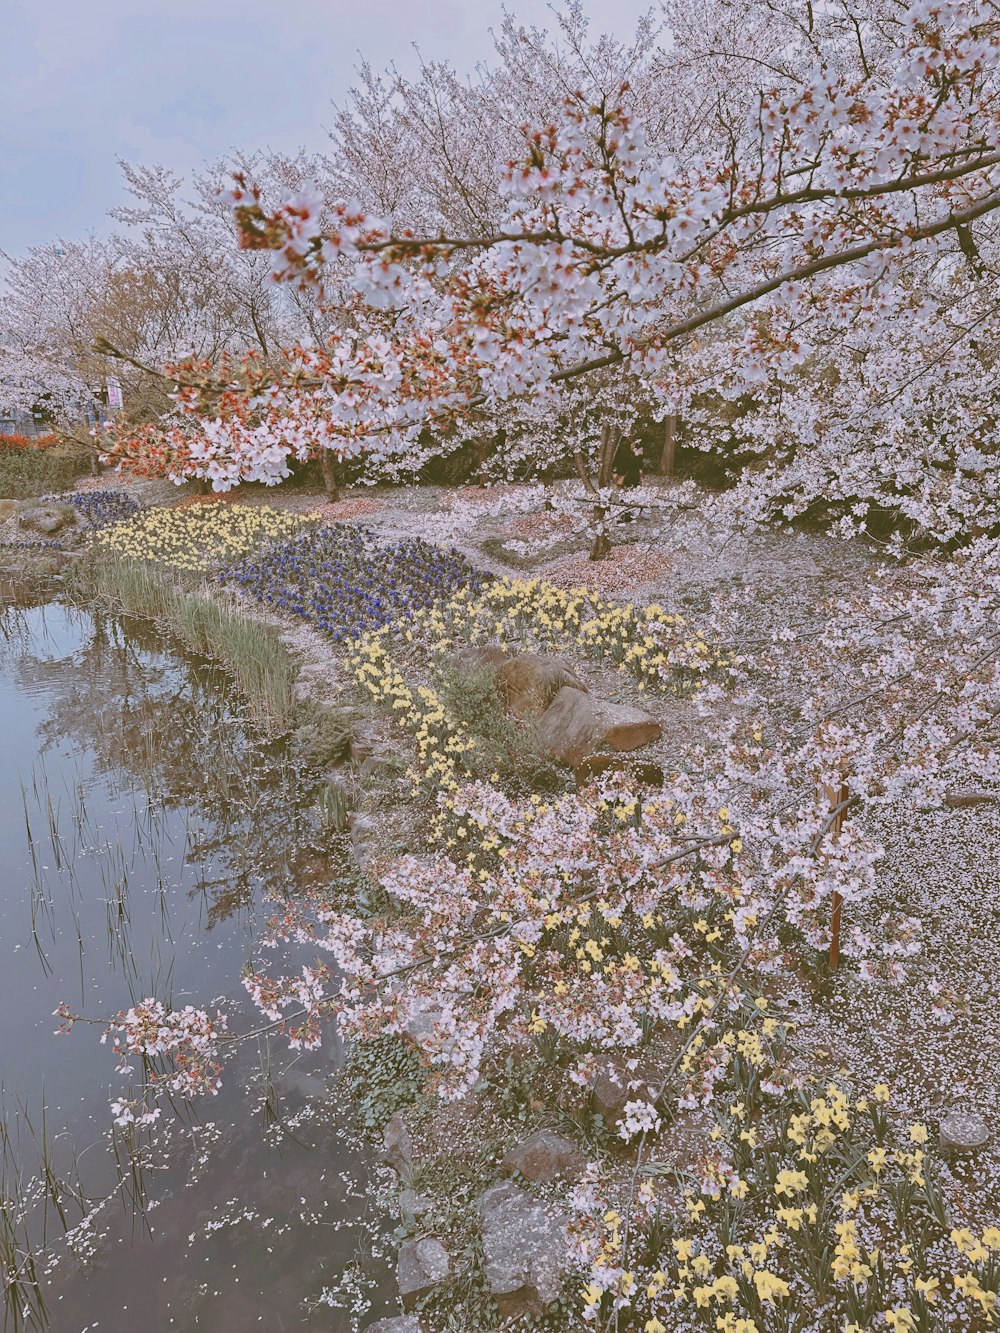 a pond surrounded by blooming trees and shrubs